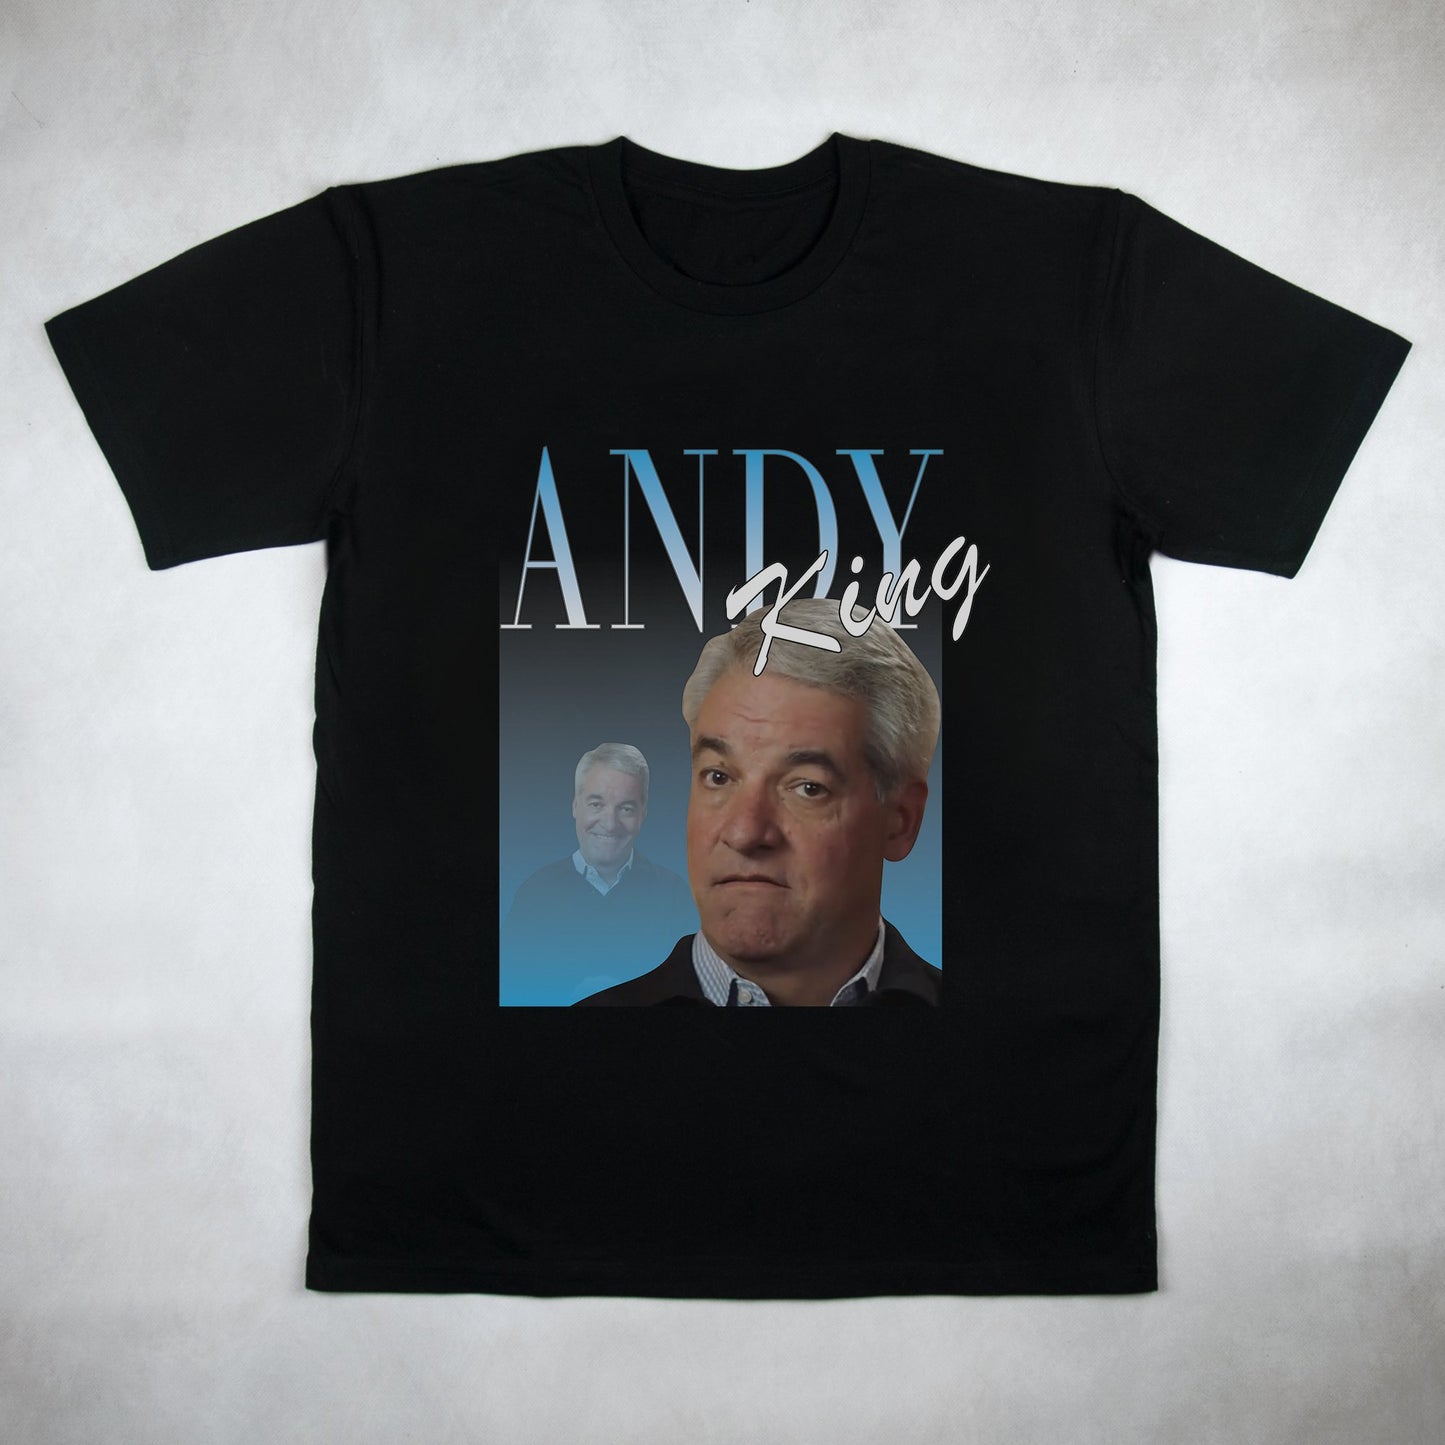 Classy Duds Short Sleeve T-Shirts S / White / Standard Andy King Commemorative Classic Tee